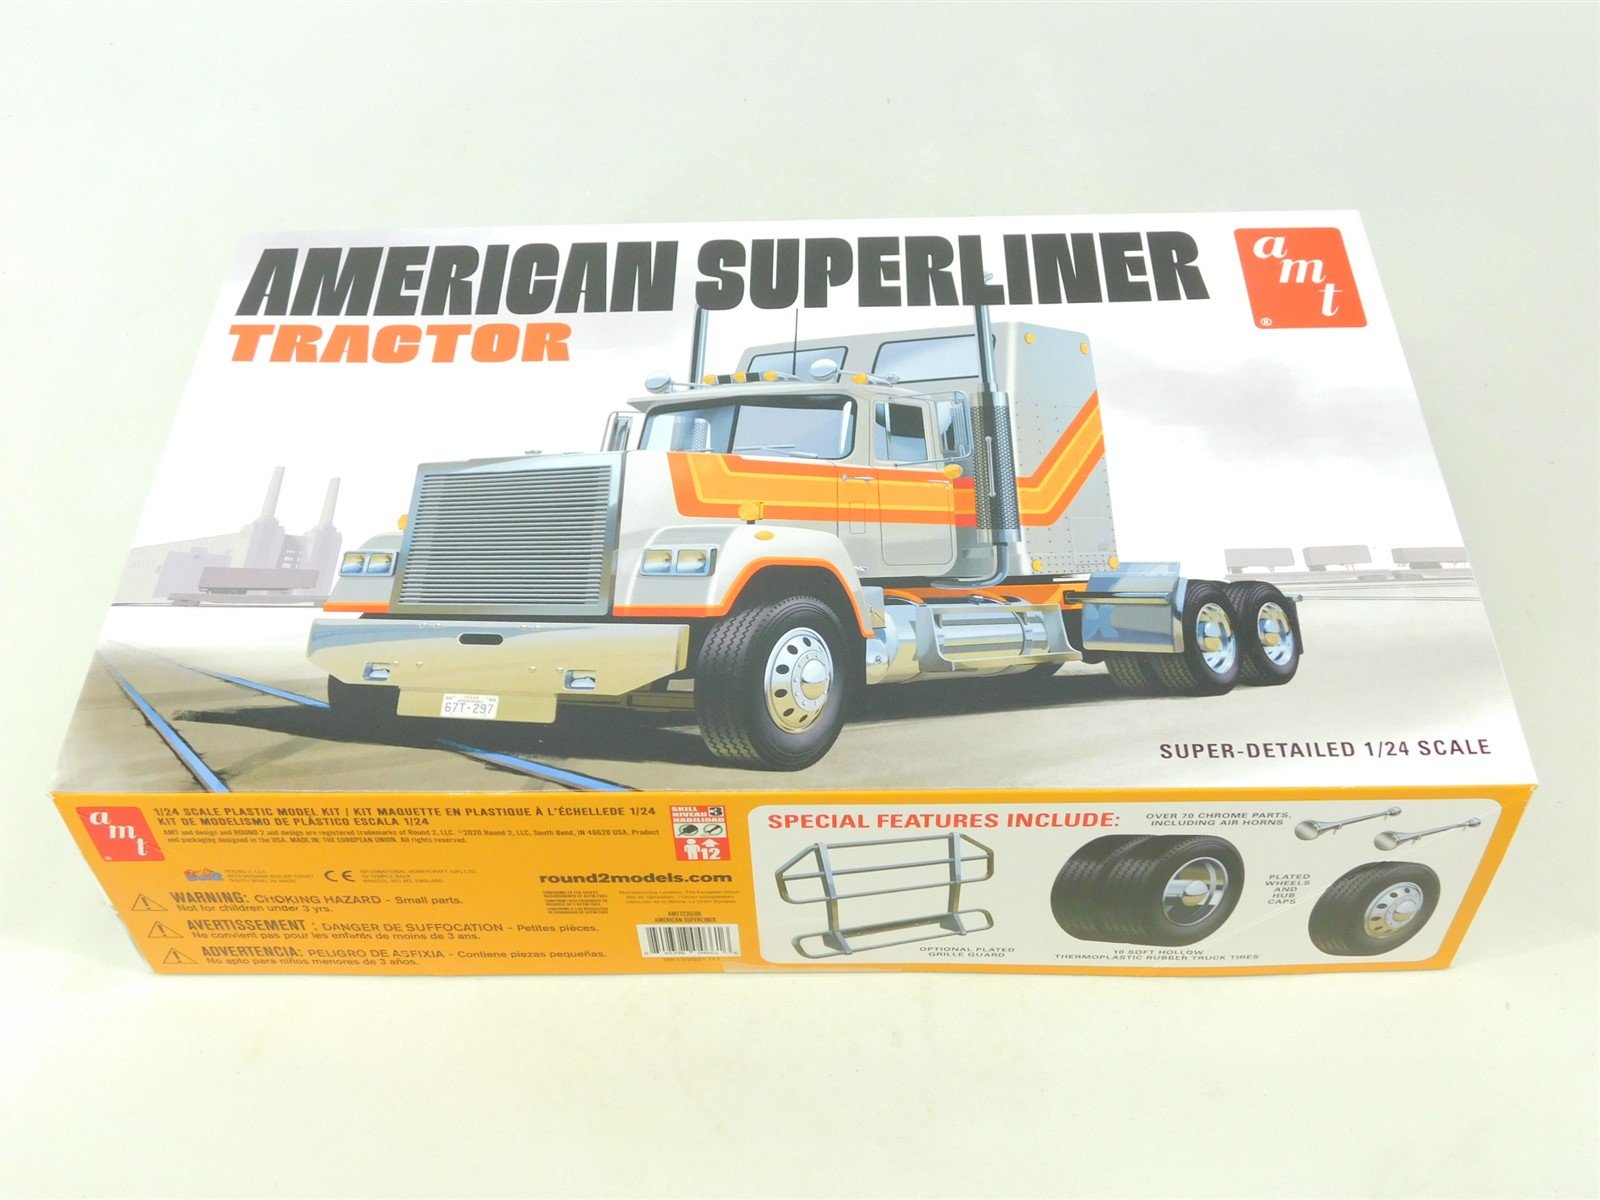 1:24 Scale AMT 1235/08 American Superliner Tractor Truck Kit - Sealed